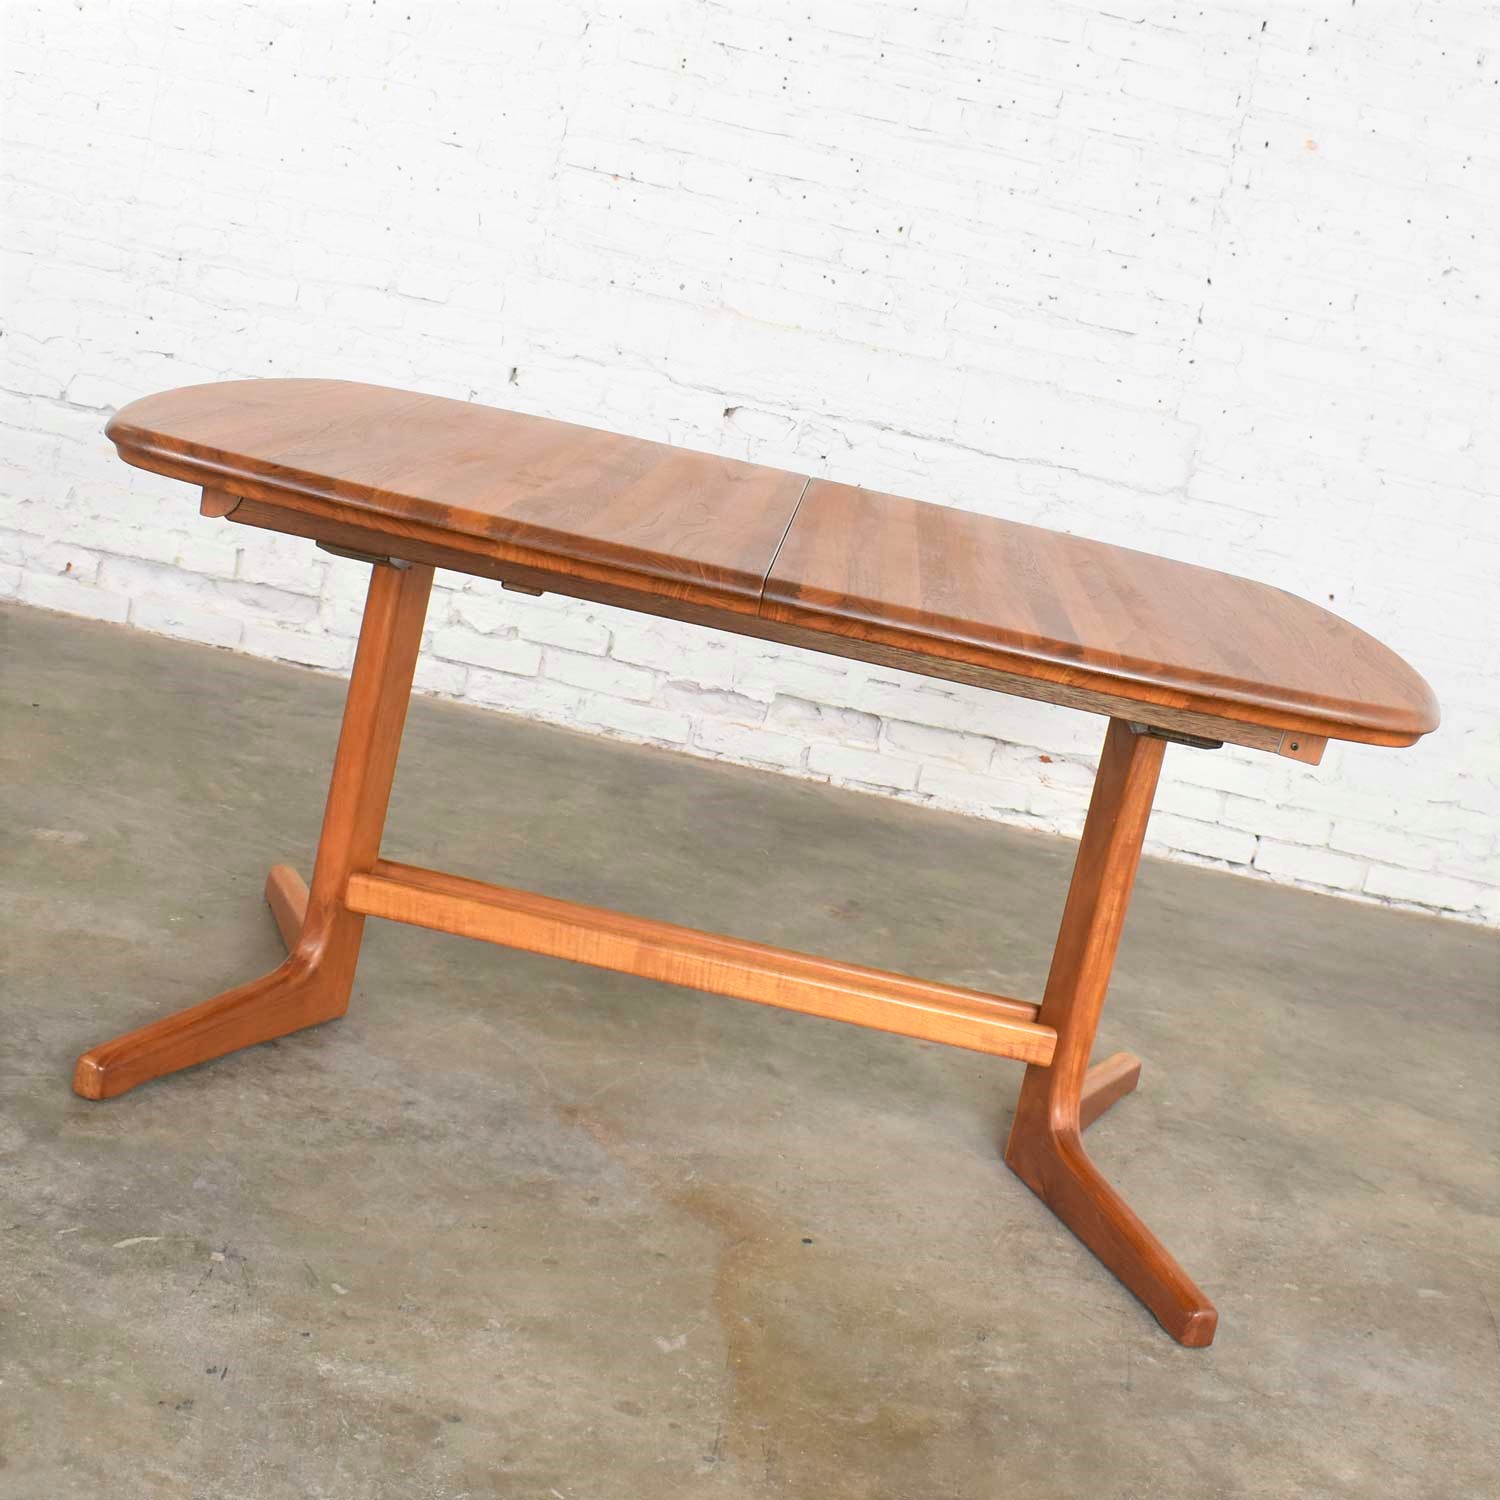 Vintage Scandinavian Modern Teak Oval Expanding Dining Table Attributed to Dyrlund 2 Leaves